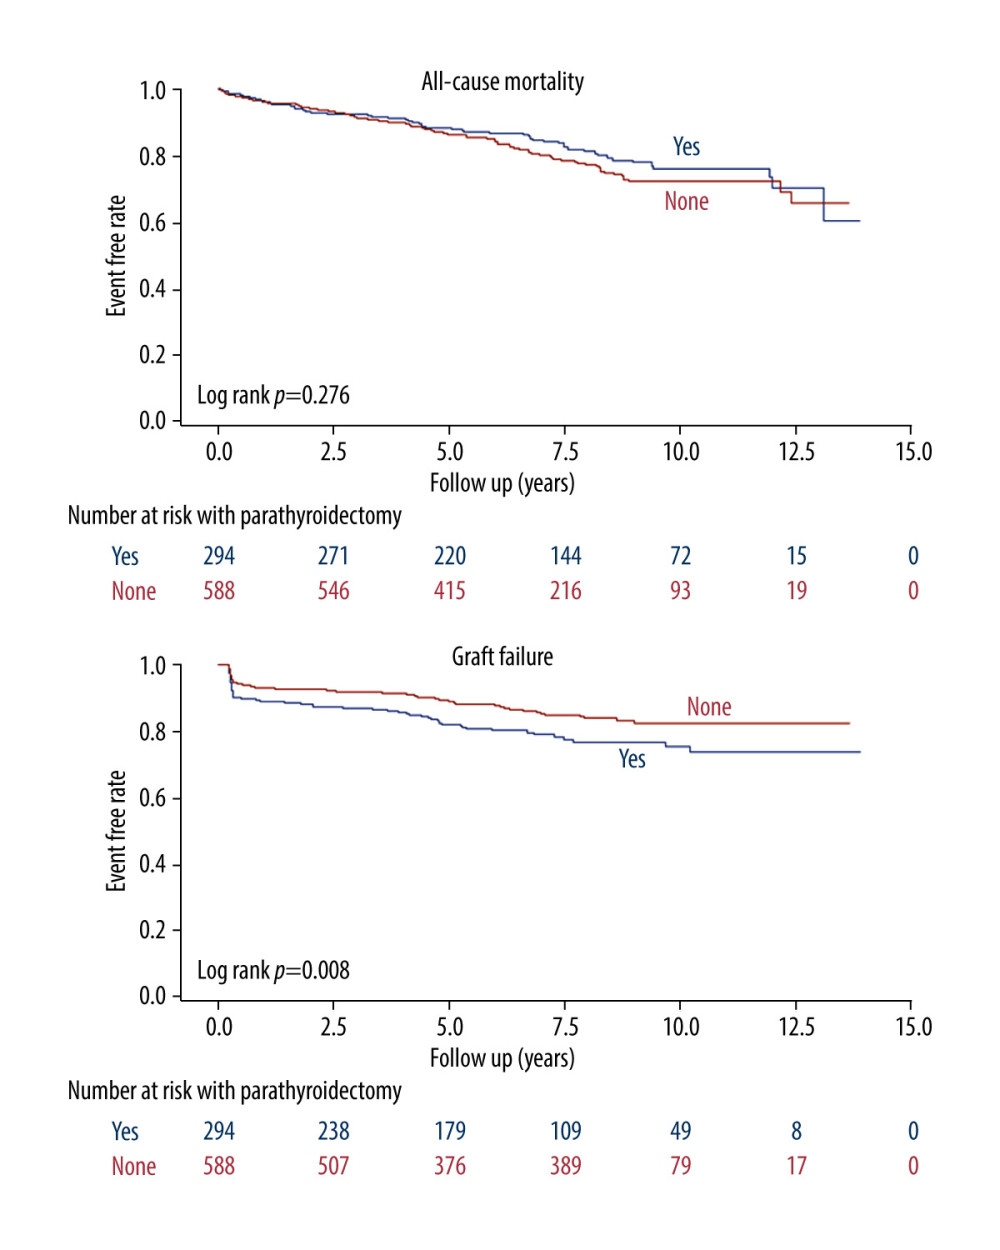 Kaplan-Meier cumulative event-free plots of (A) all-cause mortality (B) graft failure in the study population according to whether parathyroidectomy was performed before kidney transplantation.